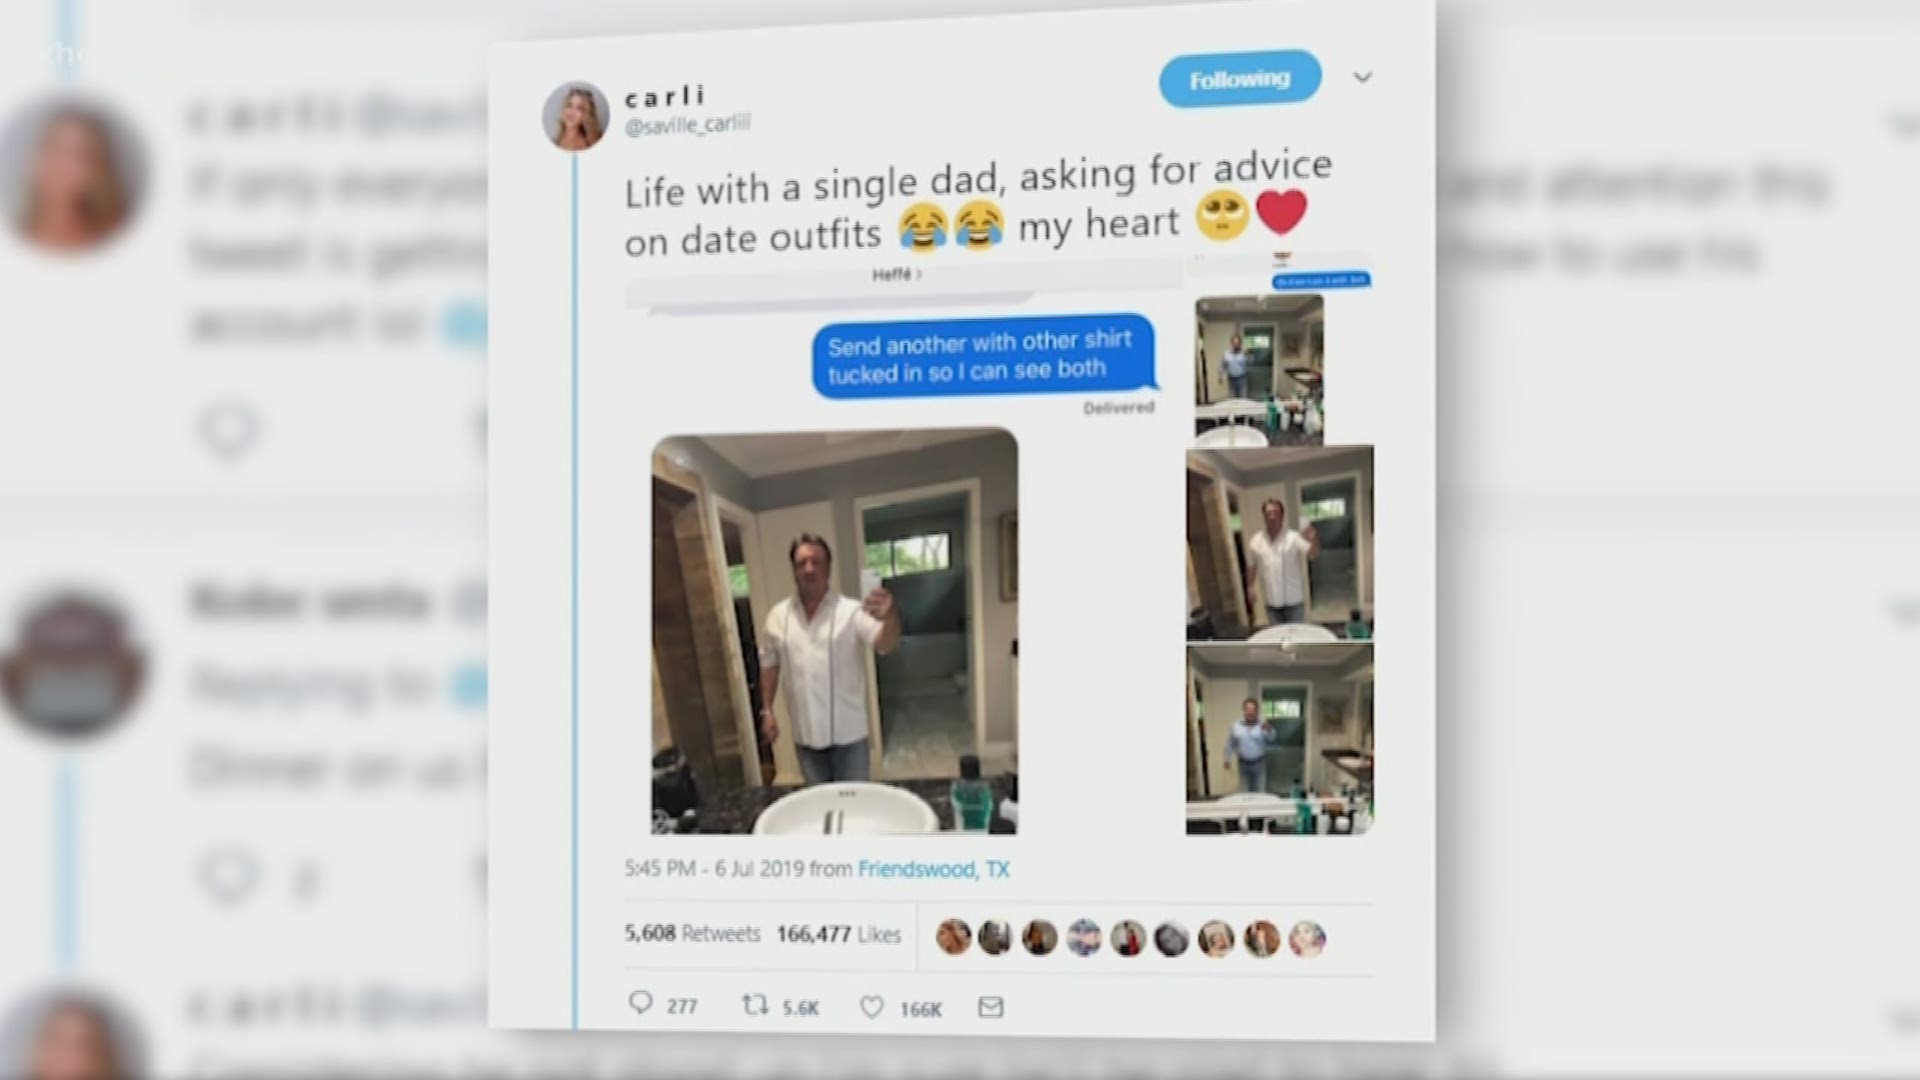 A Friendswood father texted his daughter outfit options for a date. The daughter posted their text thread on Twitter and now the dad is viral with his own hastag, #TwitterDad.